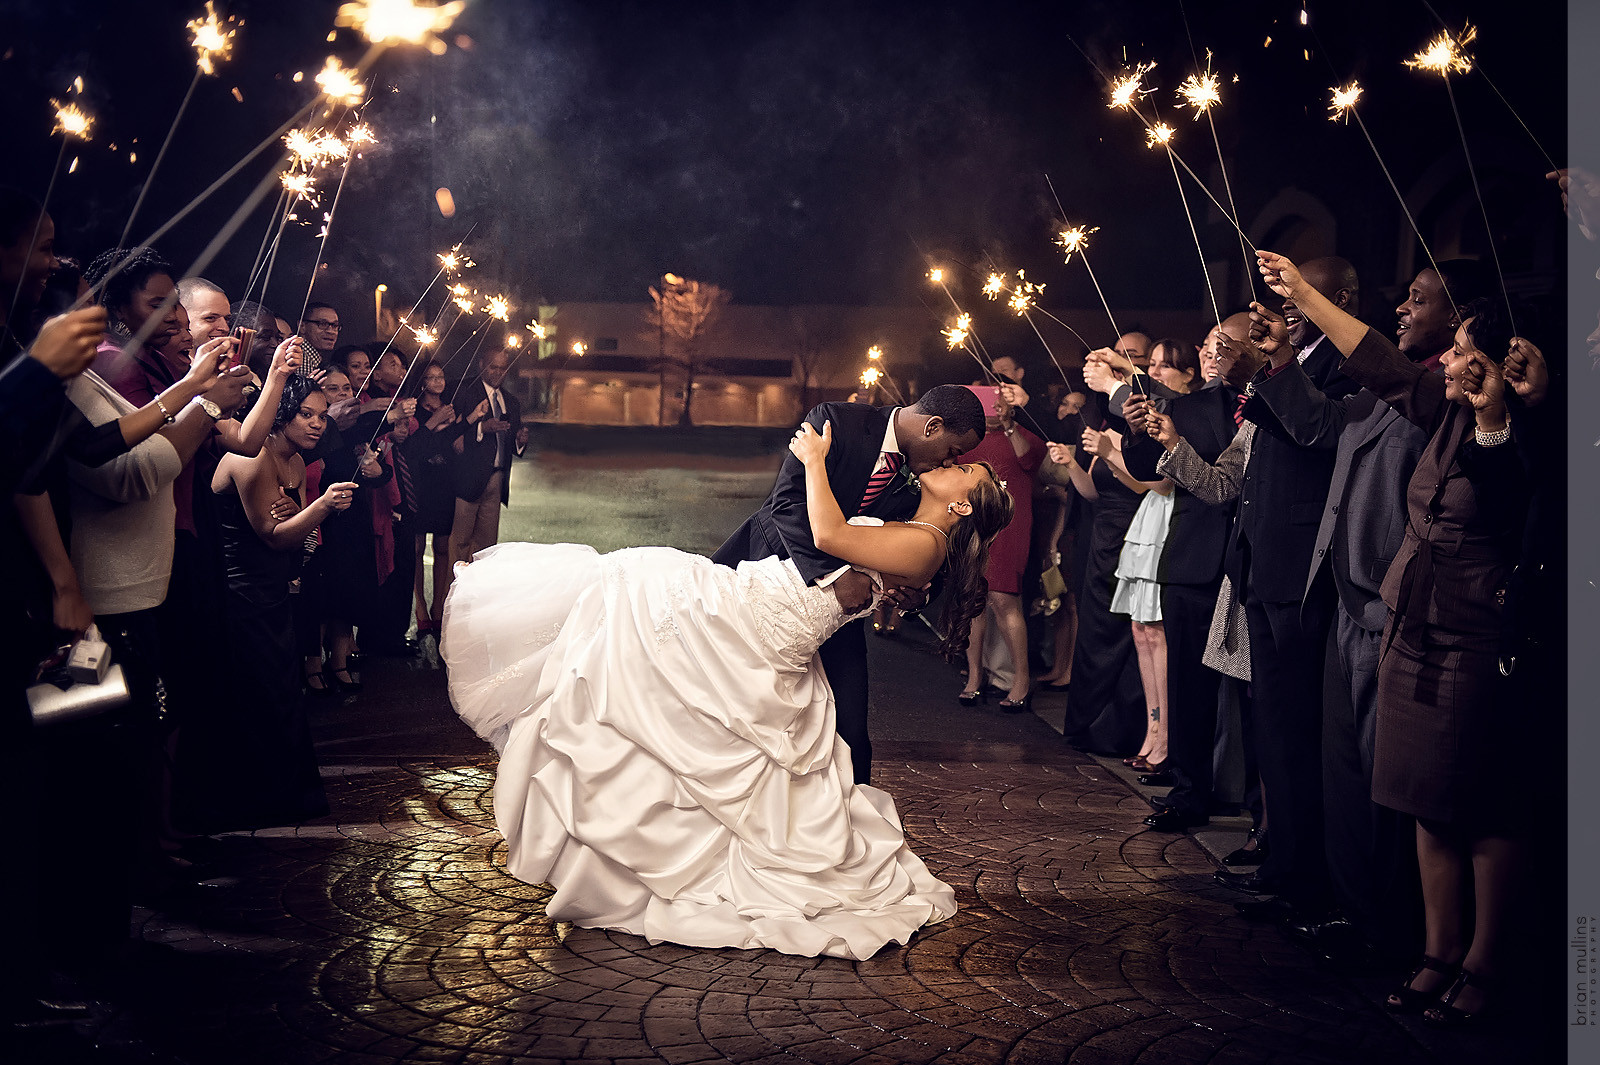 Photographing Sparklers At A Wedding
 How the Wrong Sparklers Almost Cost Me My Wedding